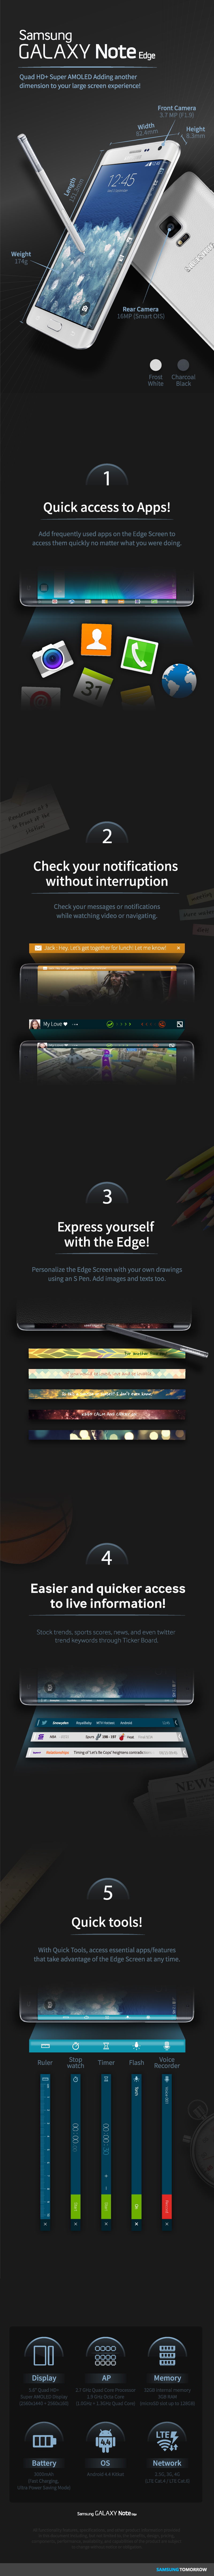 Galaxy Note Edge Infographic